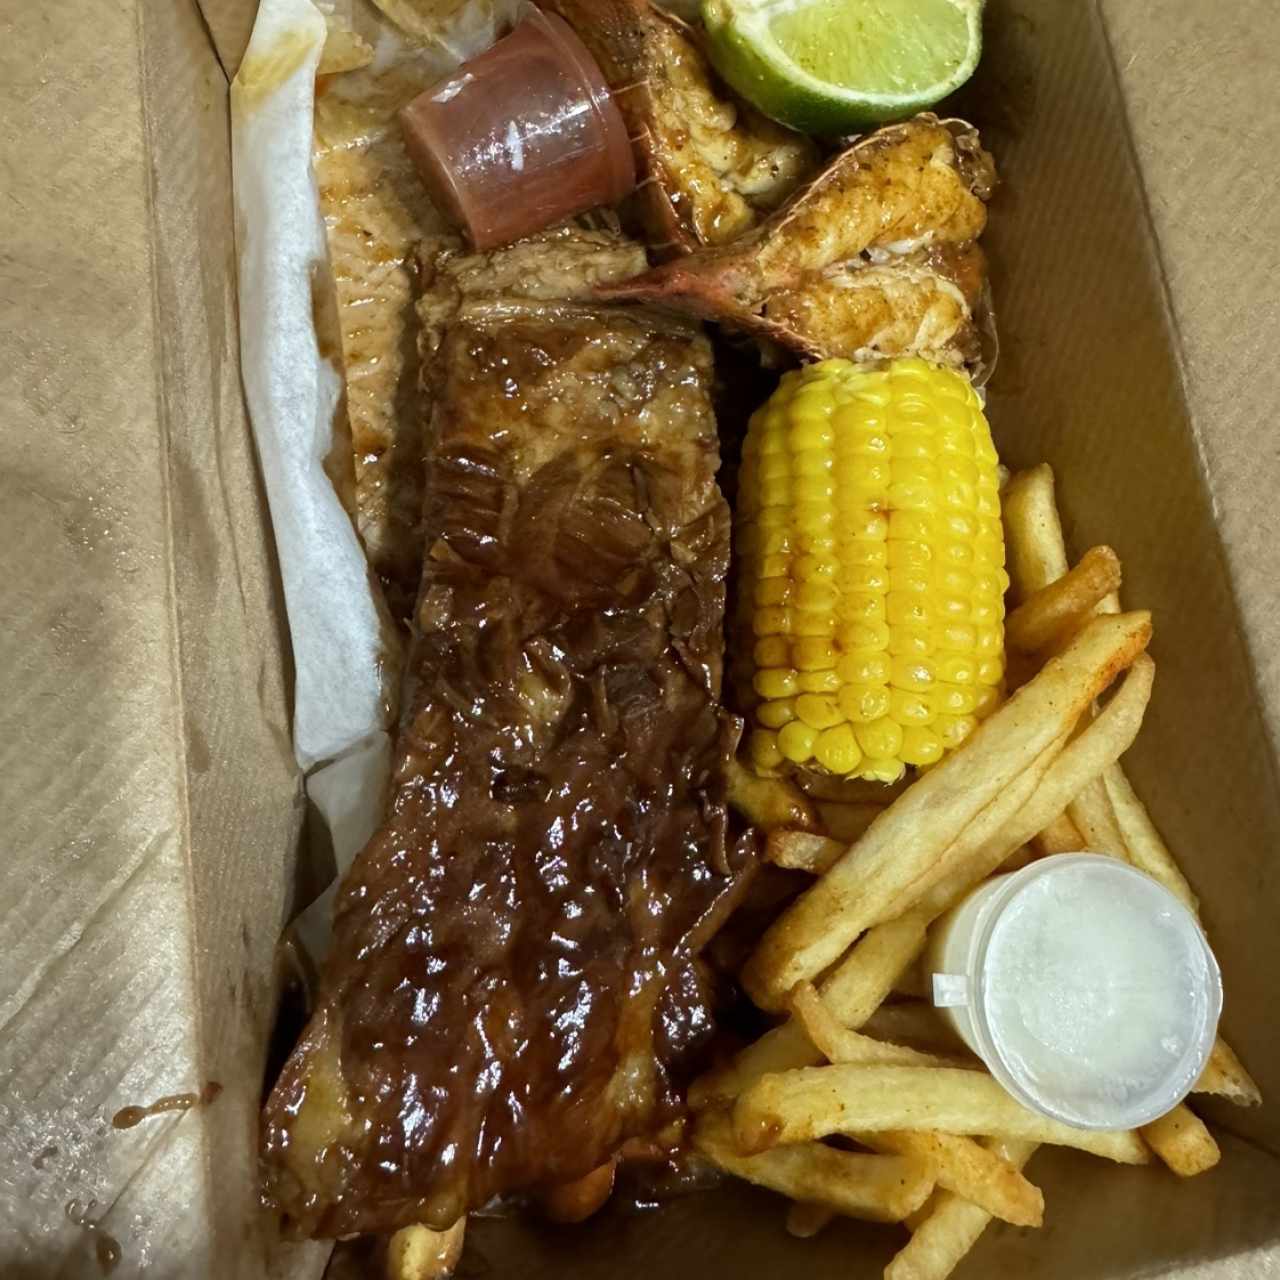 Lobster and Ribs Mix